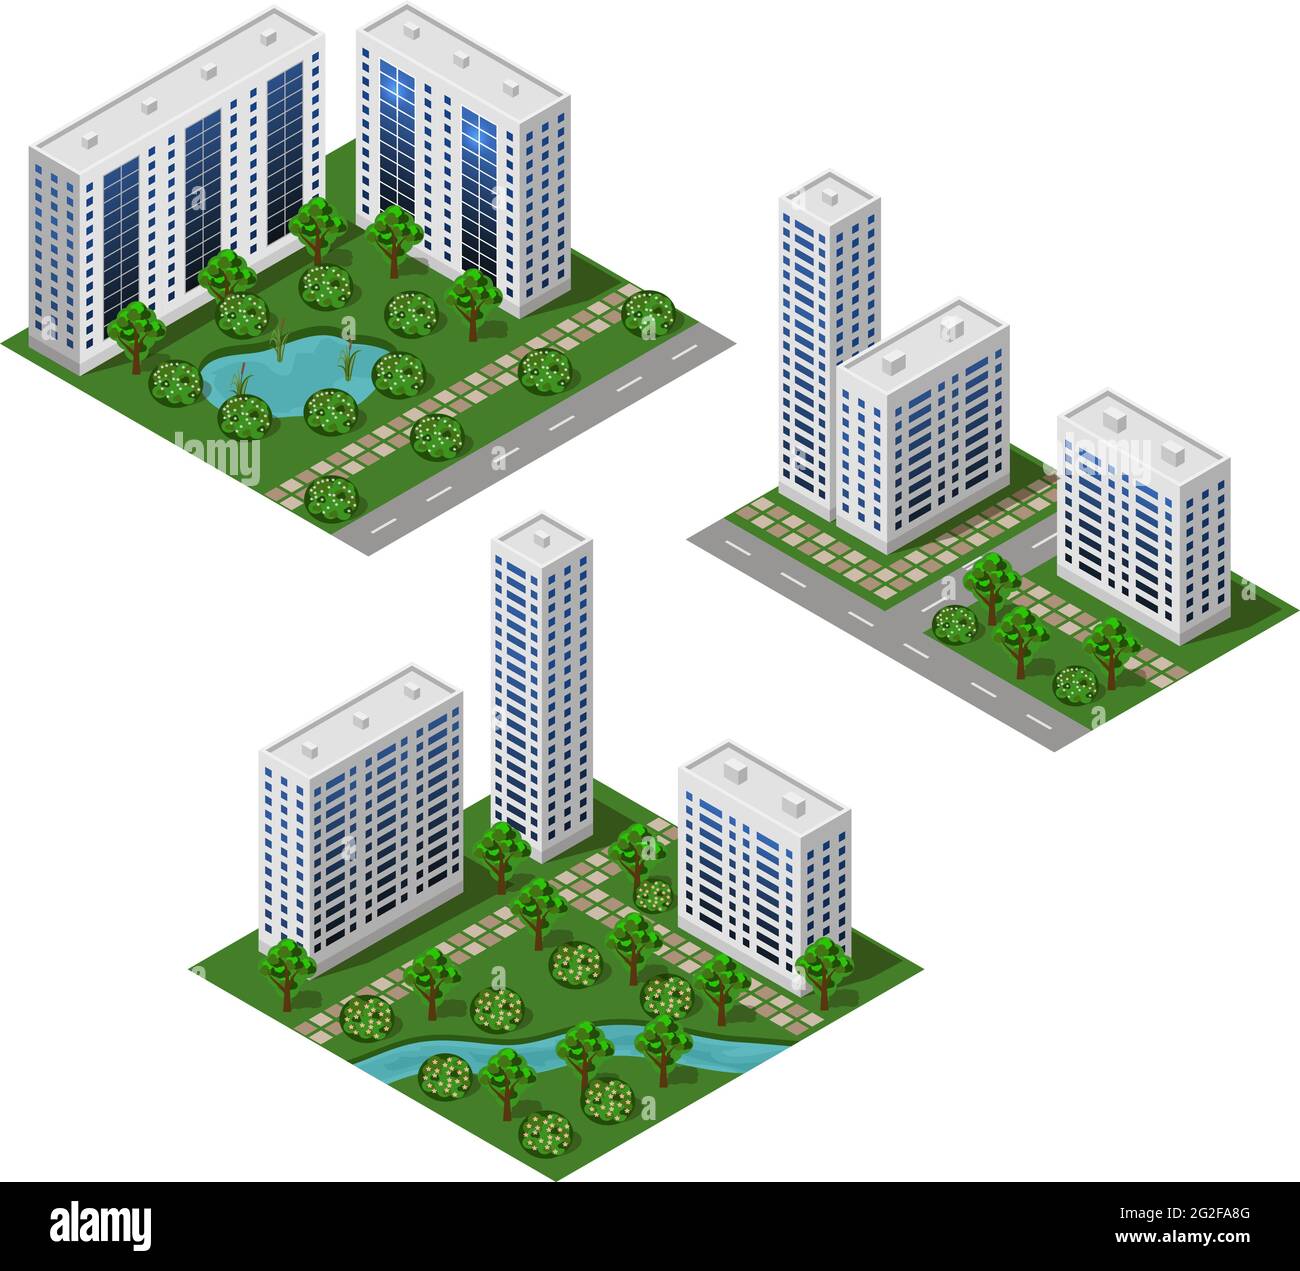 Isometric city set. Urban landscape 3d elements to design cityscape. Big modern buildings, street, trees, town garden with pond. Isolated modules. Vec Stock Vector